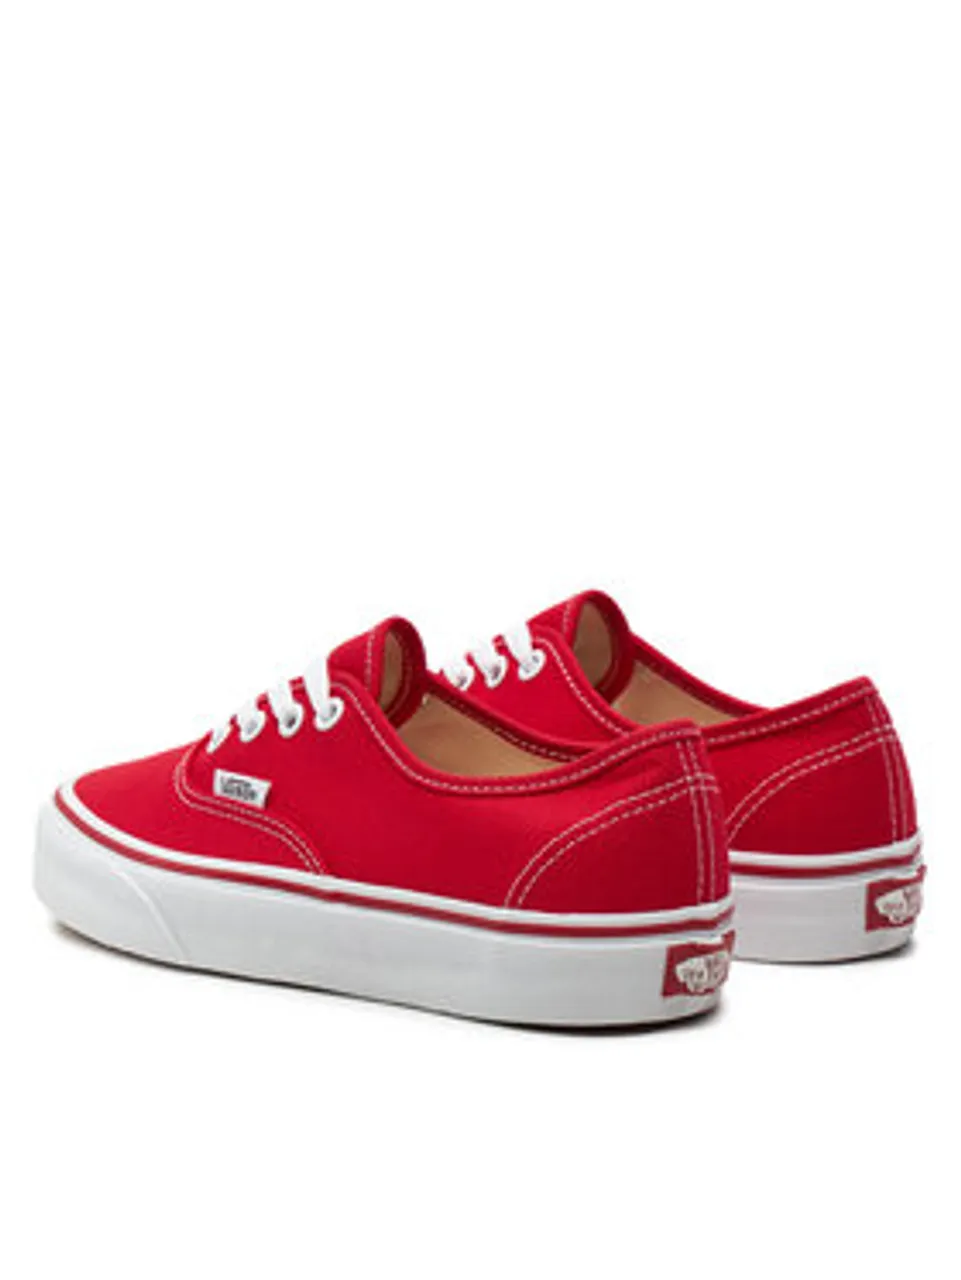 Vans Sneakers aus Stoff Authentic VN000EE3RED Rot